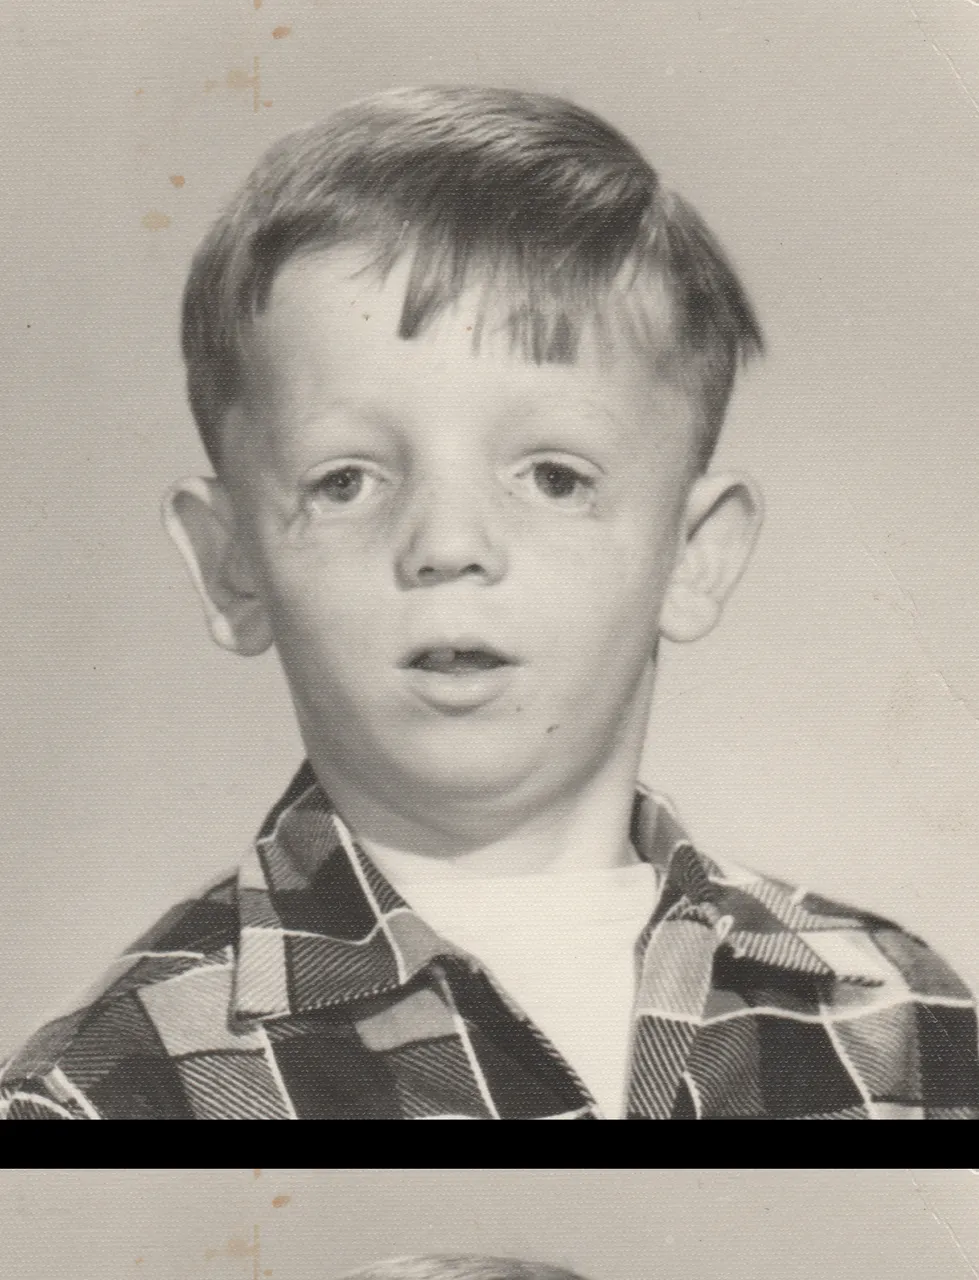 1960 maybe - dad born in 1950 - 01.png